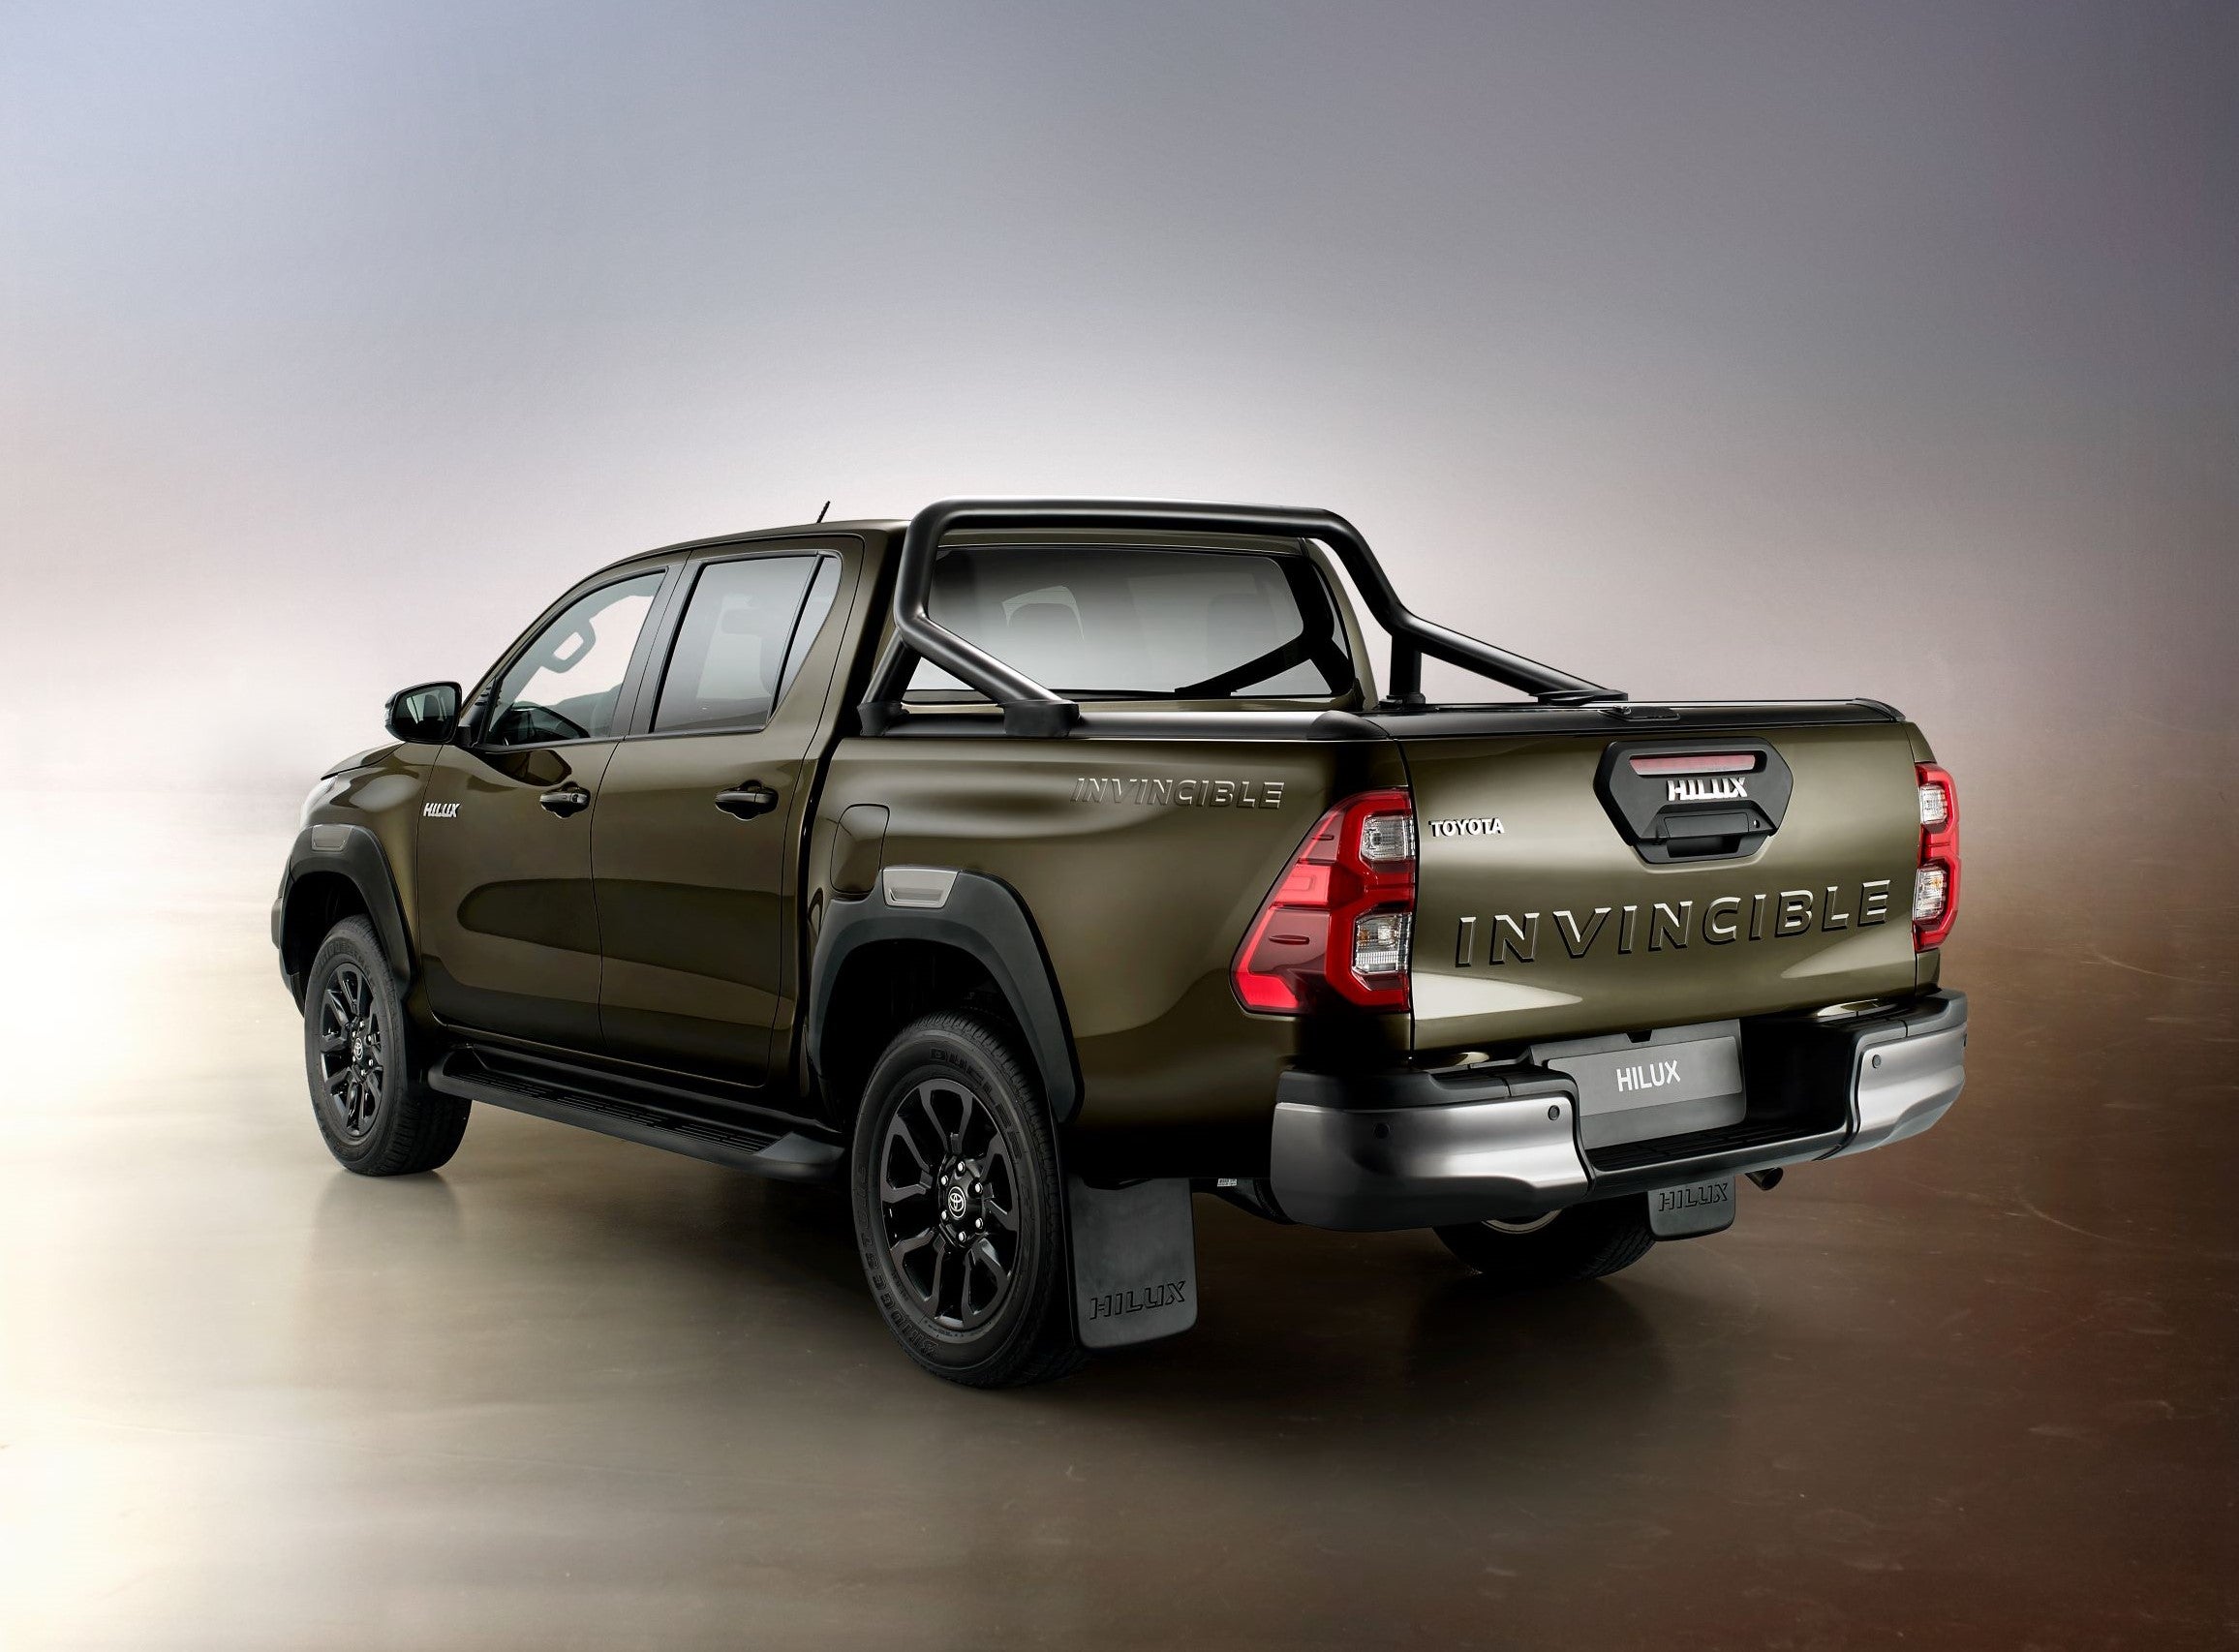 2021 Toyota Hilux: Everyone's International Truck Gets Serious Upgrades